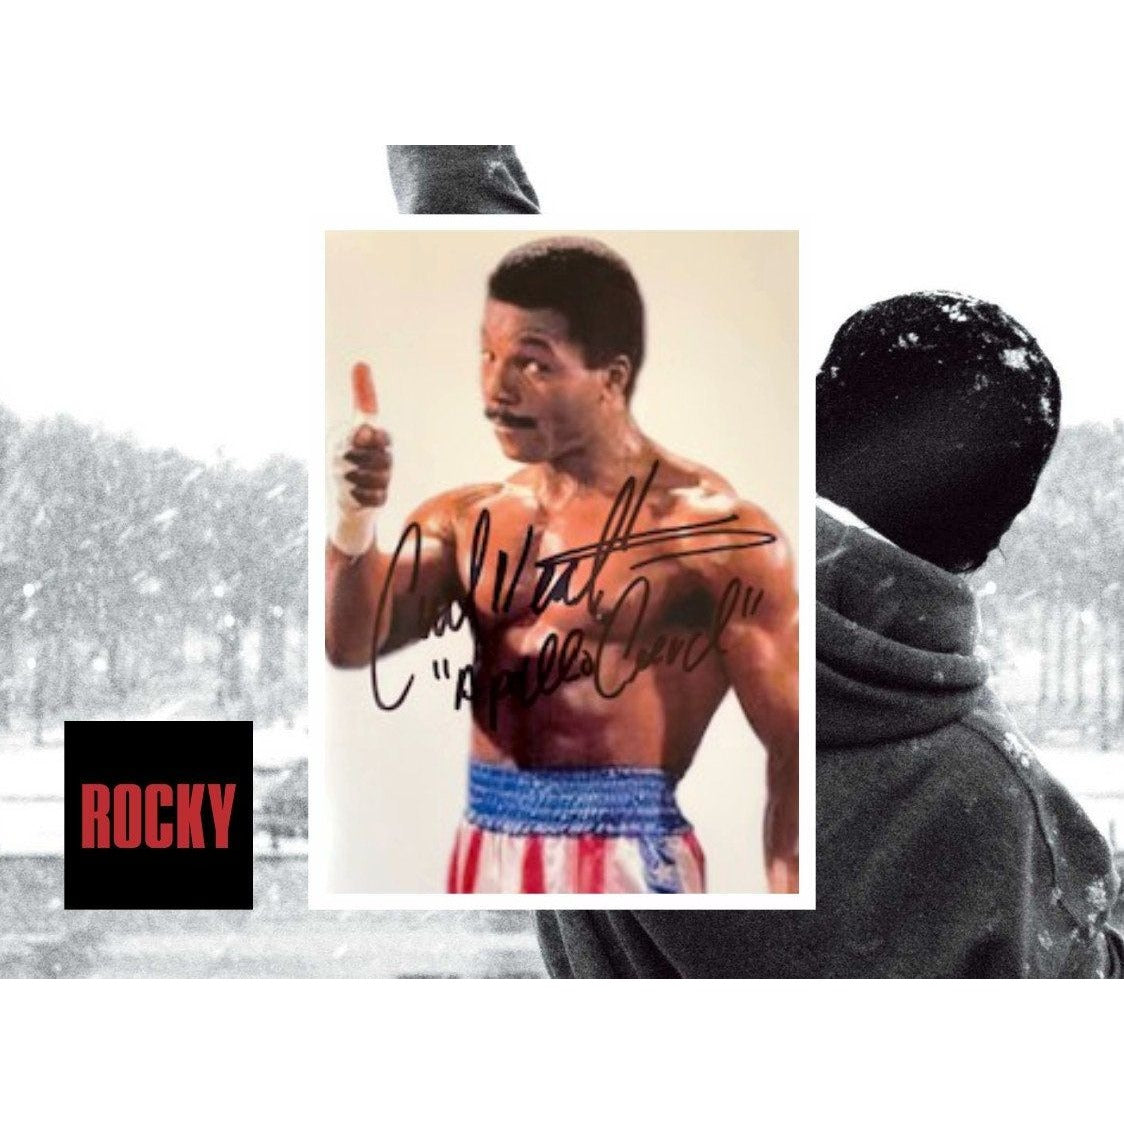 Carl Weathers Apollo Creed 5 x 7 photo sign with proof